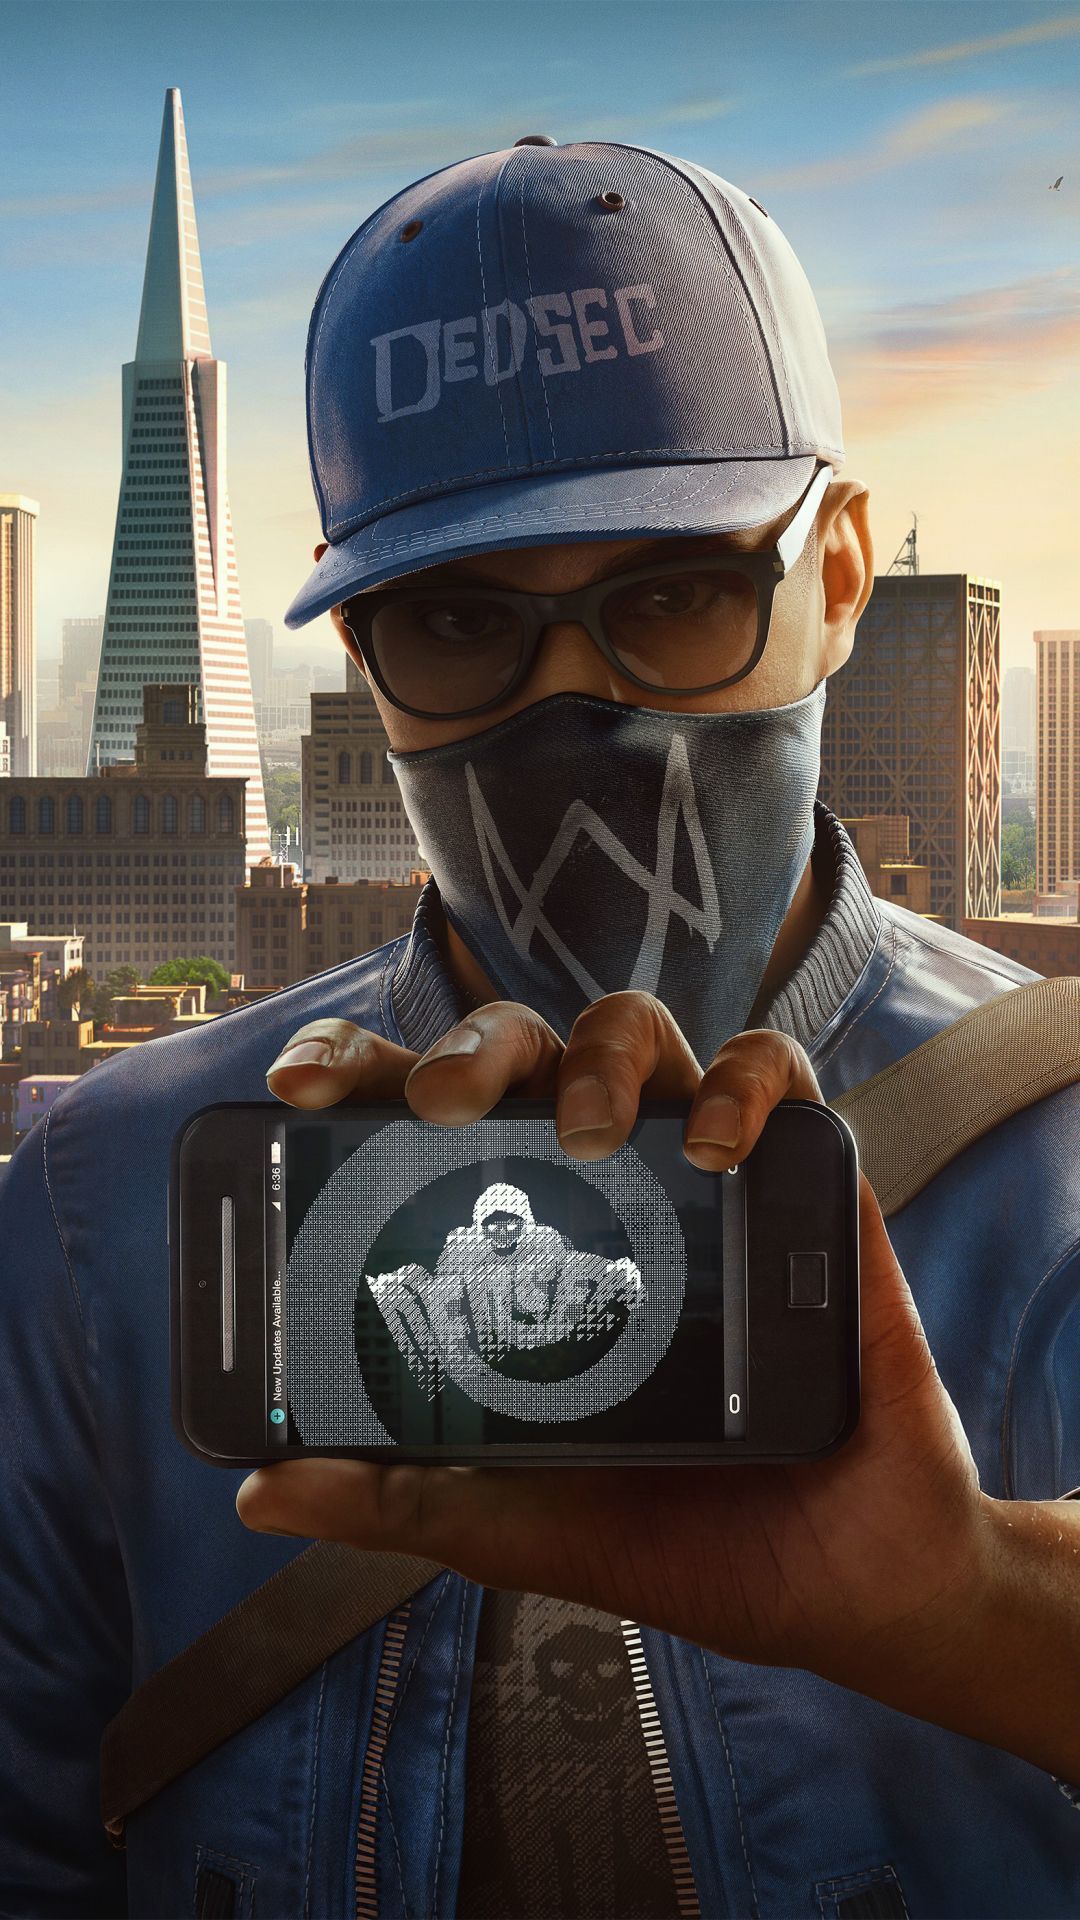 Watch Dogs Wallpapers - Top 35 Best Watch Dogs Backgrounds Download